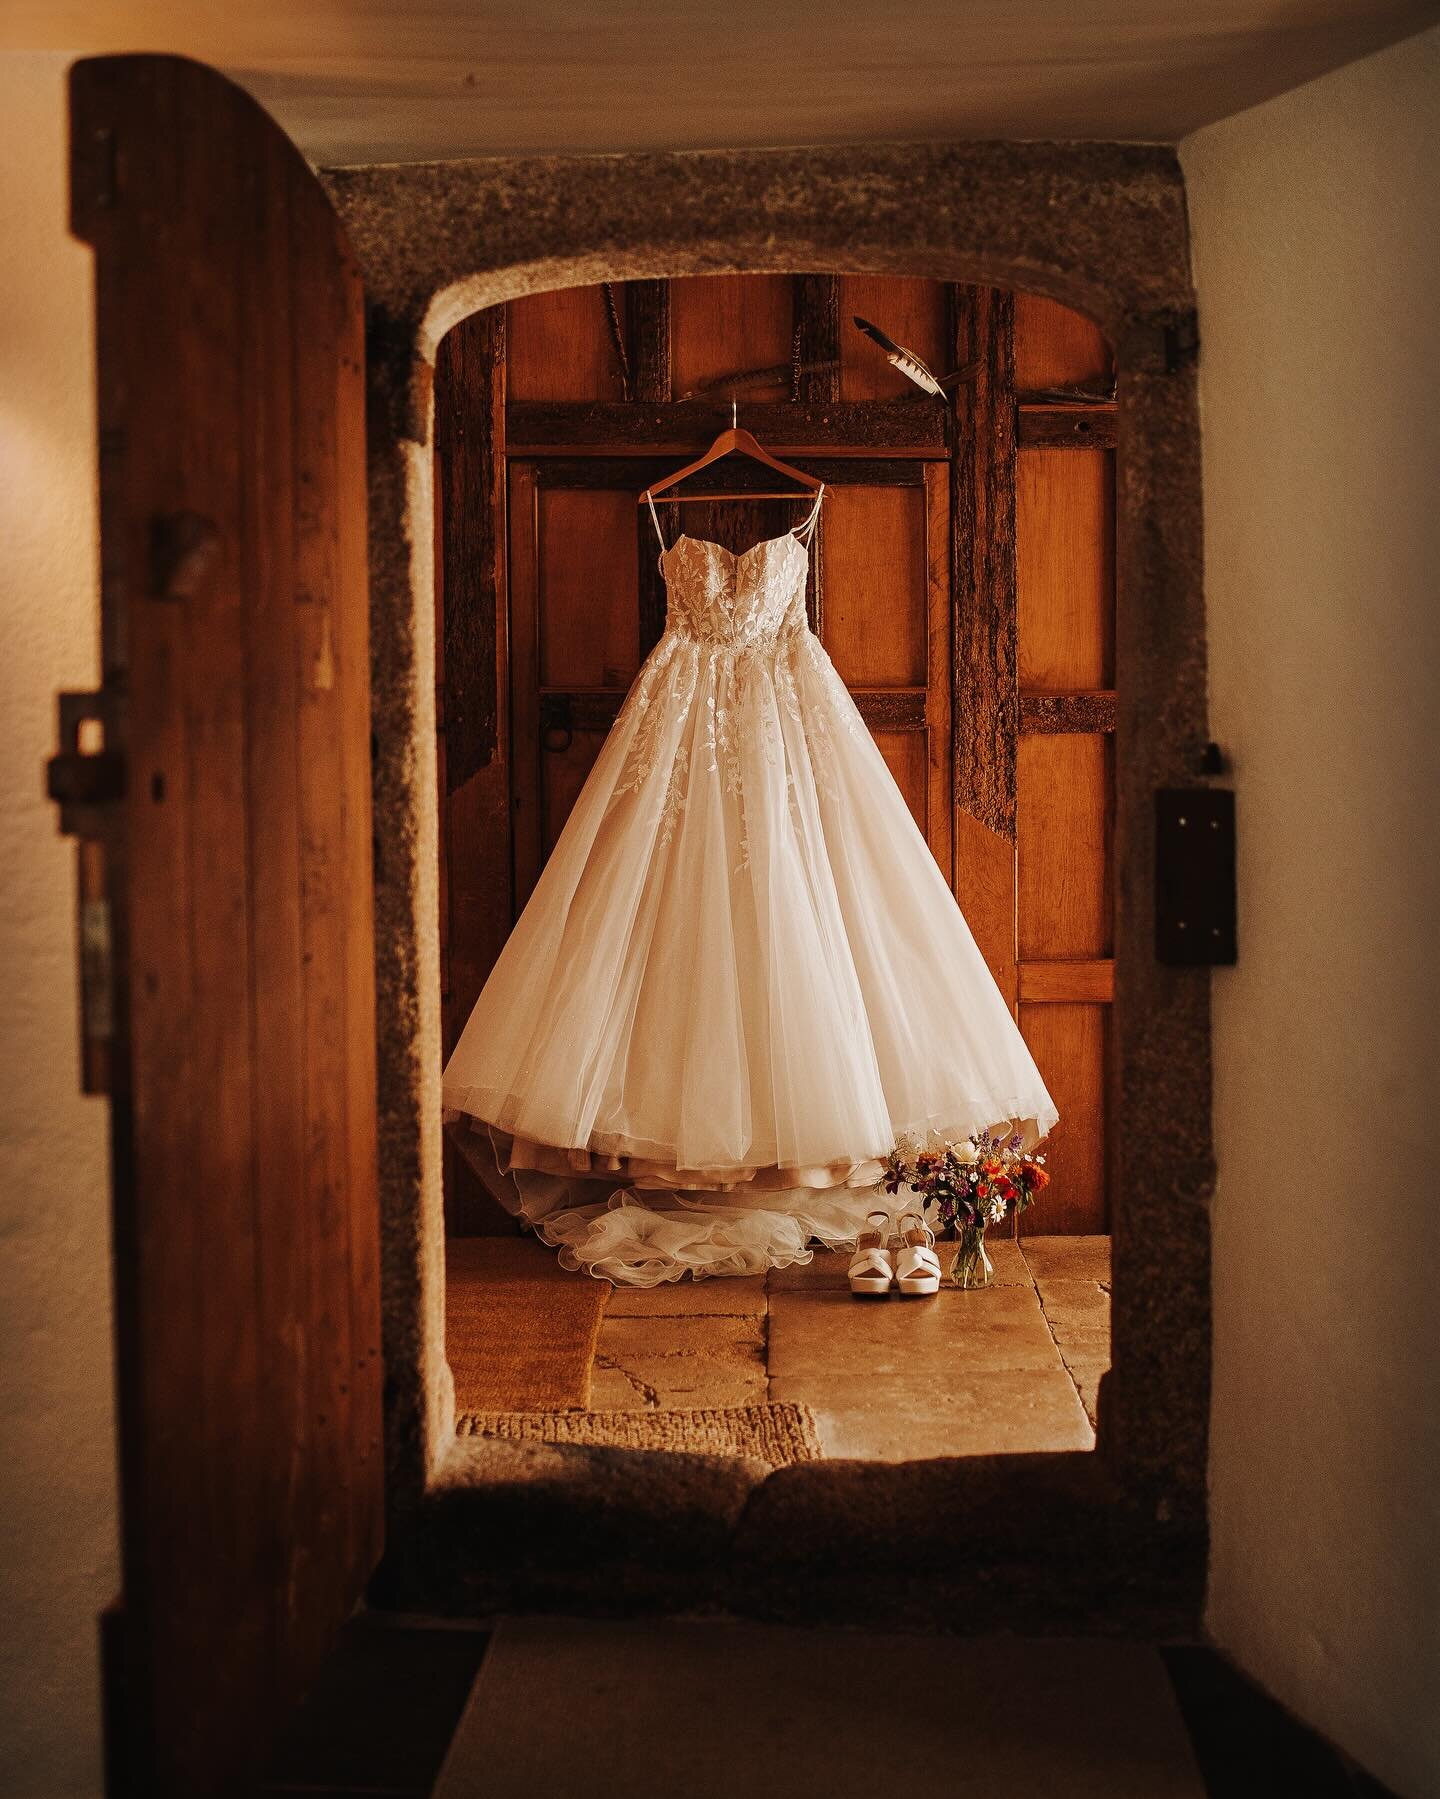 &ldquo;A wedding dress is both intimate and personal for a woman - it must reflect the personality and style of the bride.&rdquo; - Carolina Herrera.

Some gorgeous shots taken by the talented @ivyhousephotography from an intimate wedding here in Jun